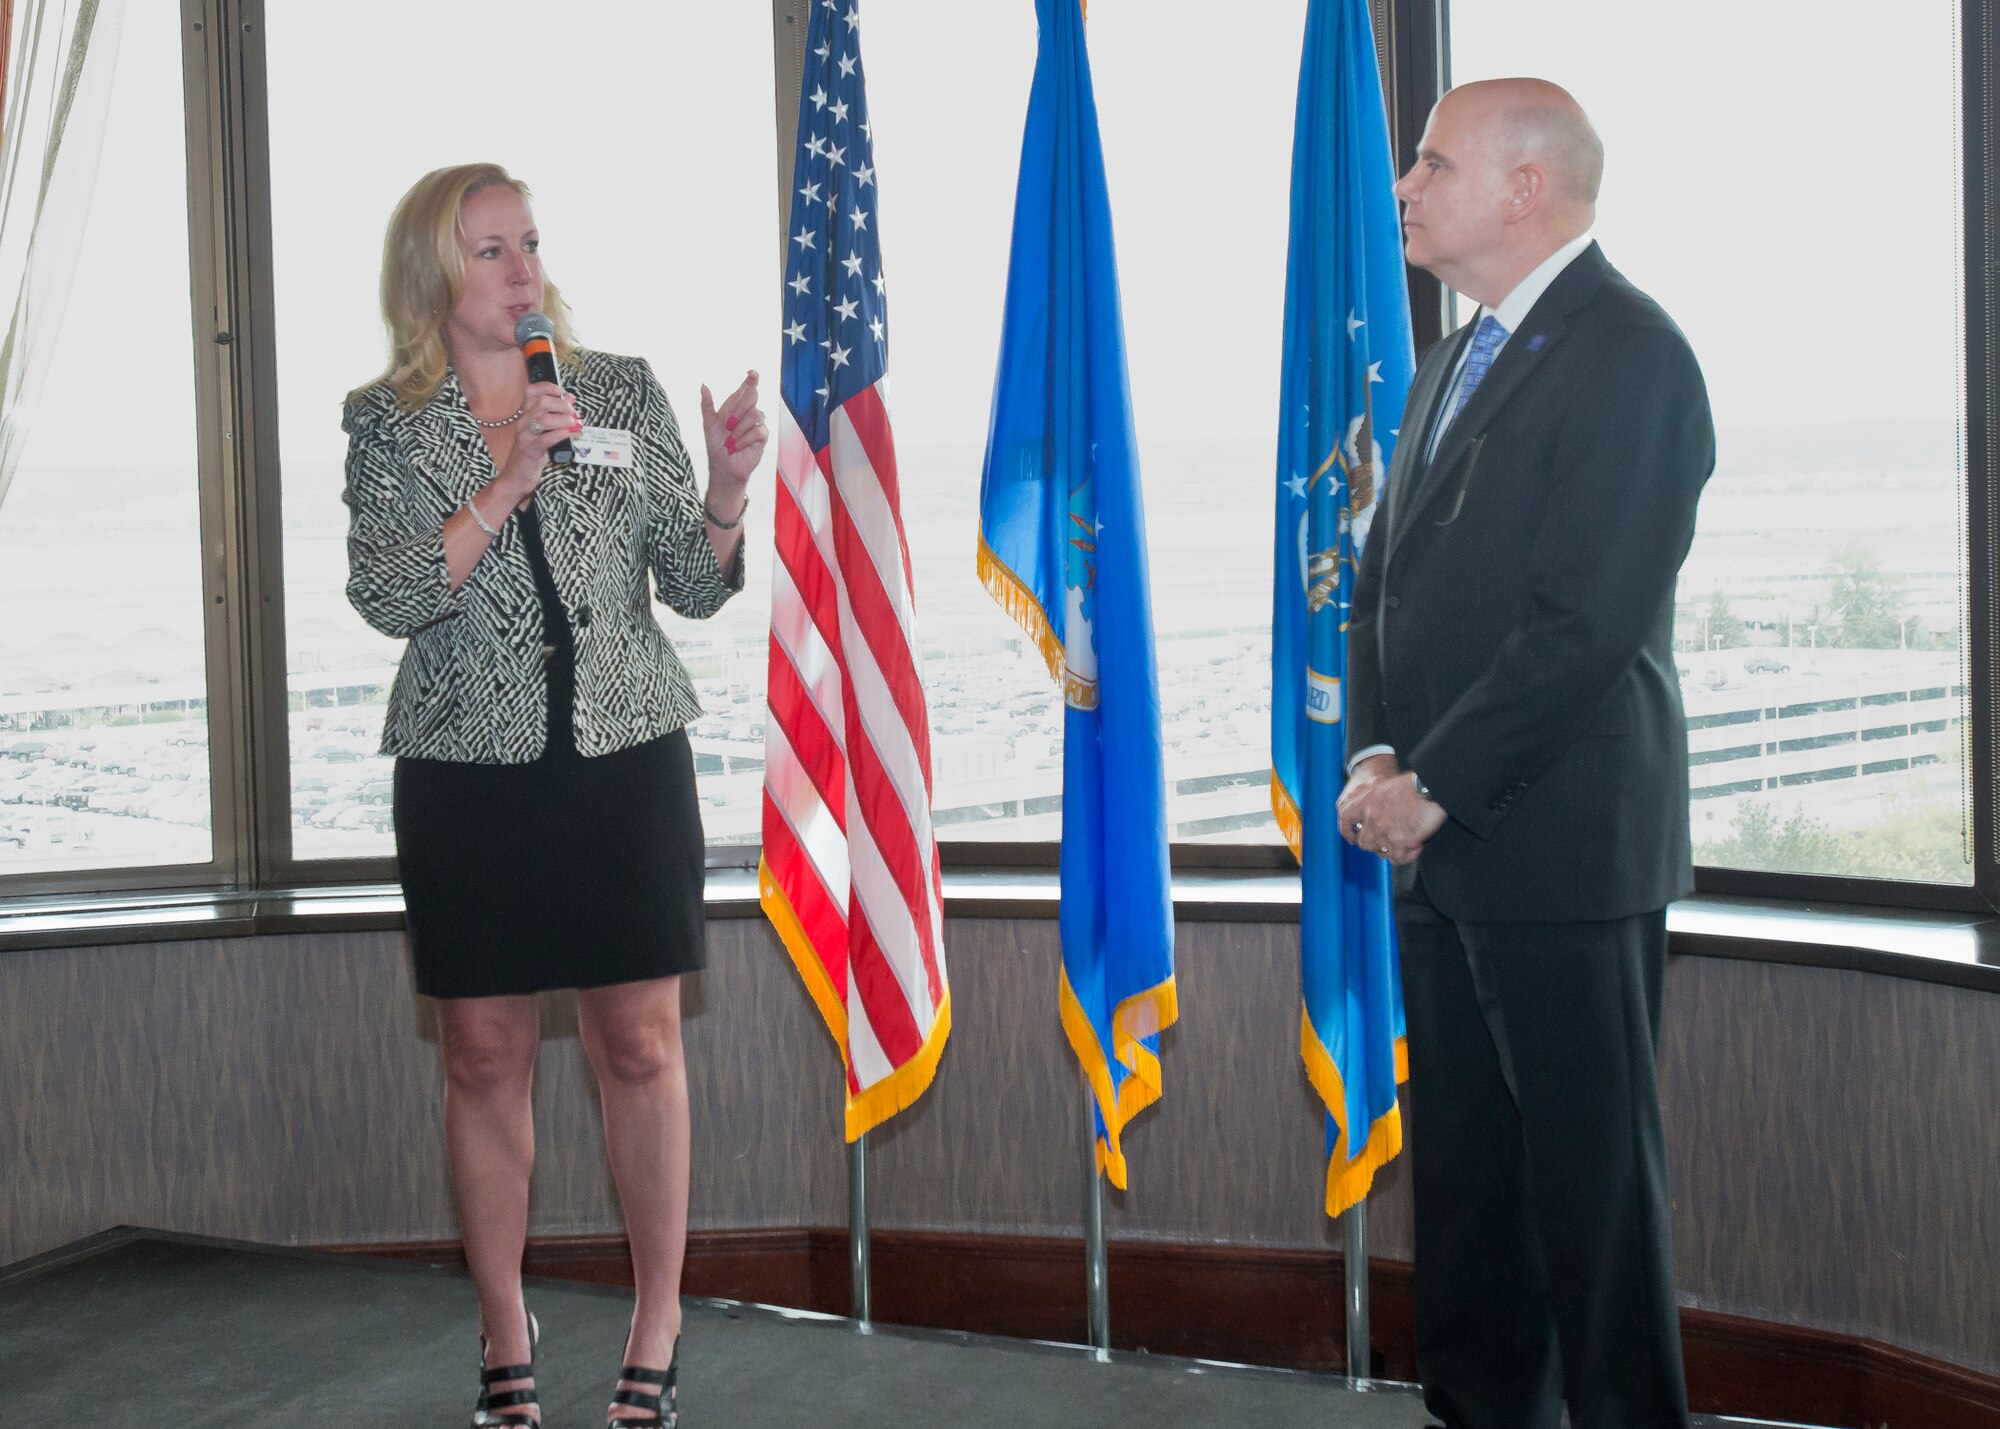 Michelle Ryan, president of the Air Force Association's D.W. Steele, Sr. Memorical Chapter, thanks Air National Guard Executive Director James J. Brooks at the 15th annual AFA Salute to the Air National Guard, held April 19, 2017 in Crystal City, Virginia. The AFA honored 12 ANG members across a broad range of specialites for their dedication and outstanding contributions to the success of the ANG and the overall Air Force mission. (U.S. Air National Guard photo by Staff Sgt. John E. Hillier)